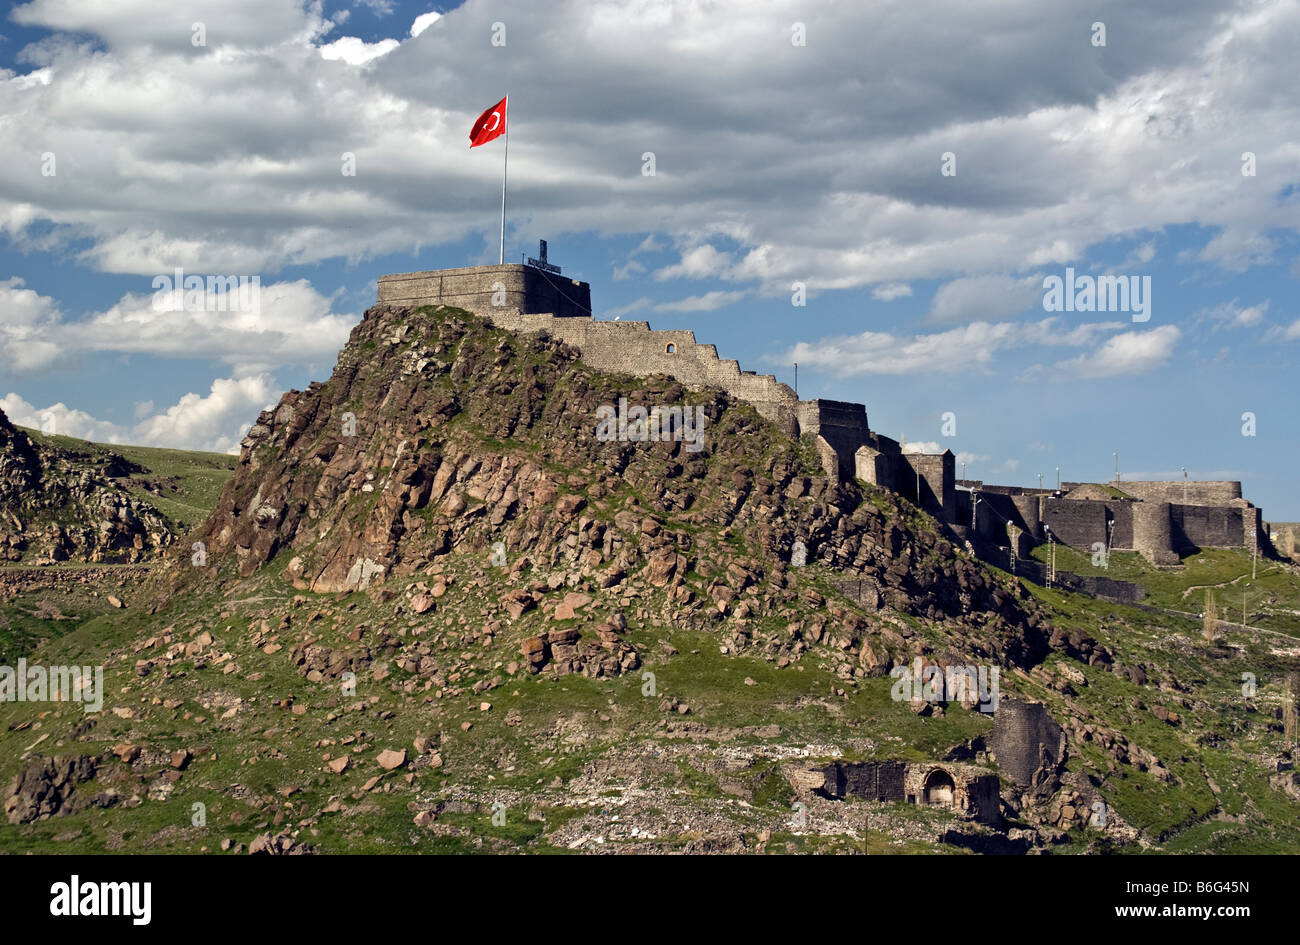 Kars Kalesi (Castle or Kale), Armenian fortress and later Ottoman citadel on hilltop overlooking city of Kars Stock Photo